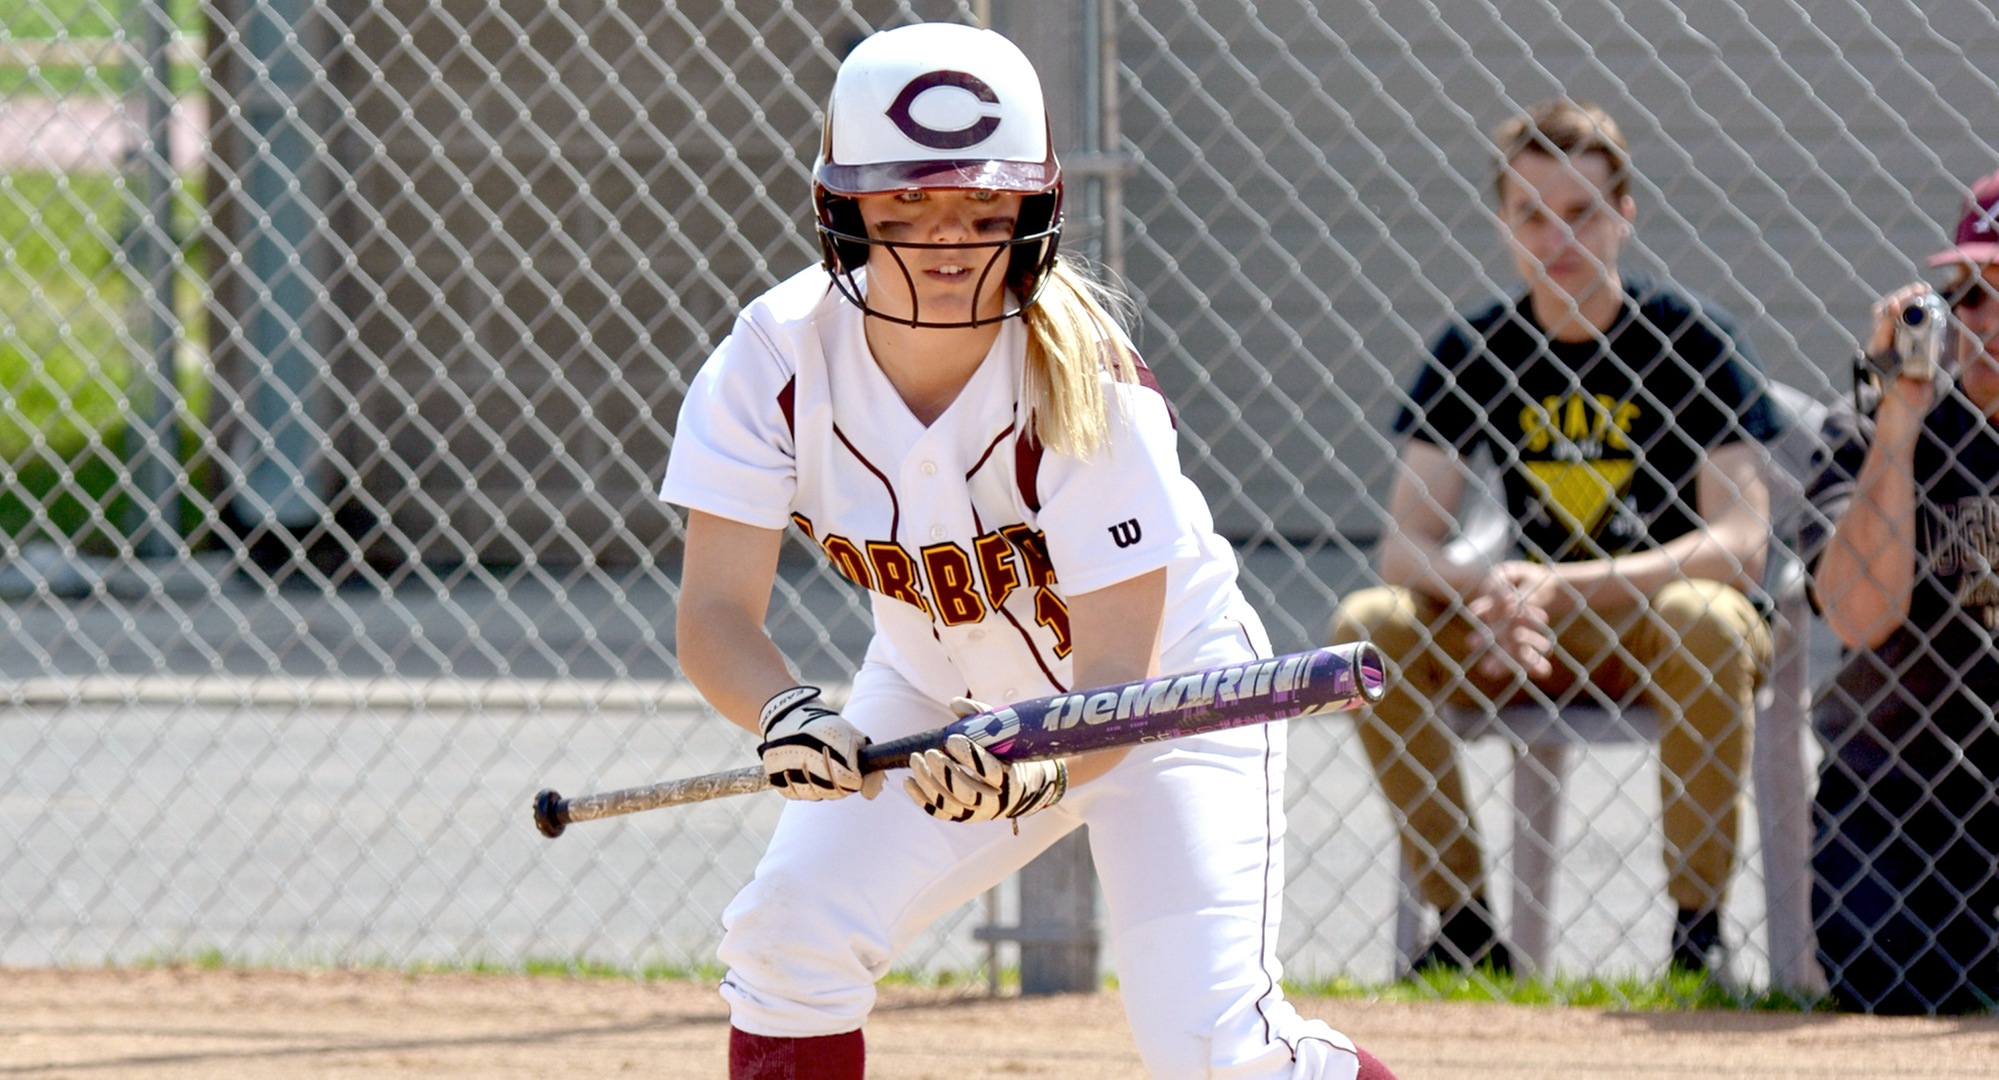 Sophomore Cora Zackrison had hits in both games for the Cobbers on Day 2 in Florida and drove in the team's only run against York.